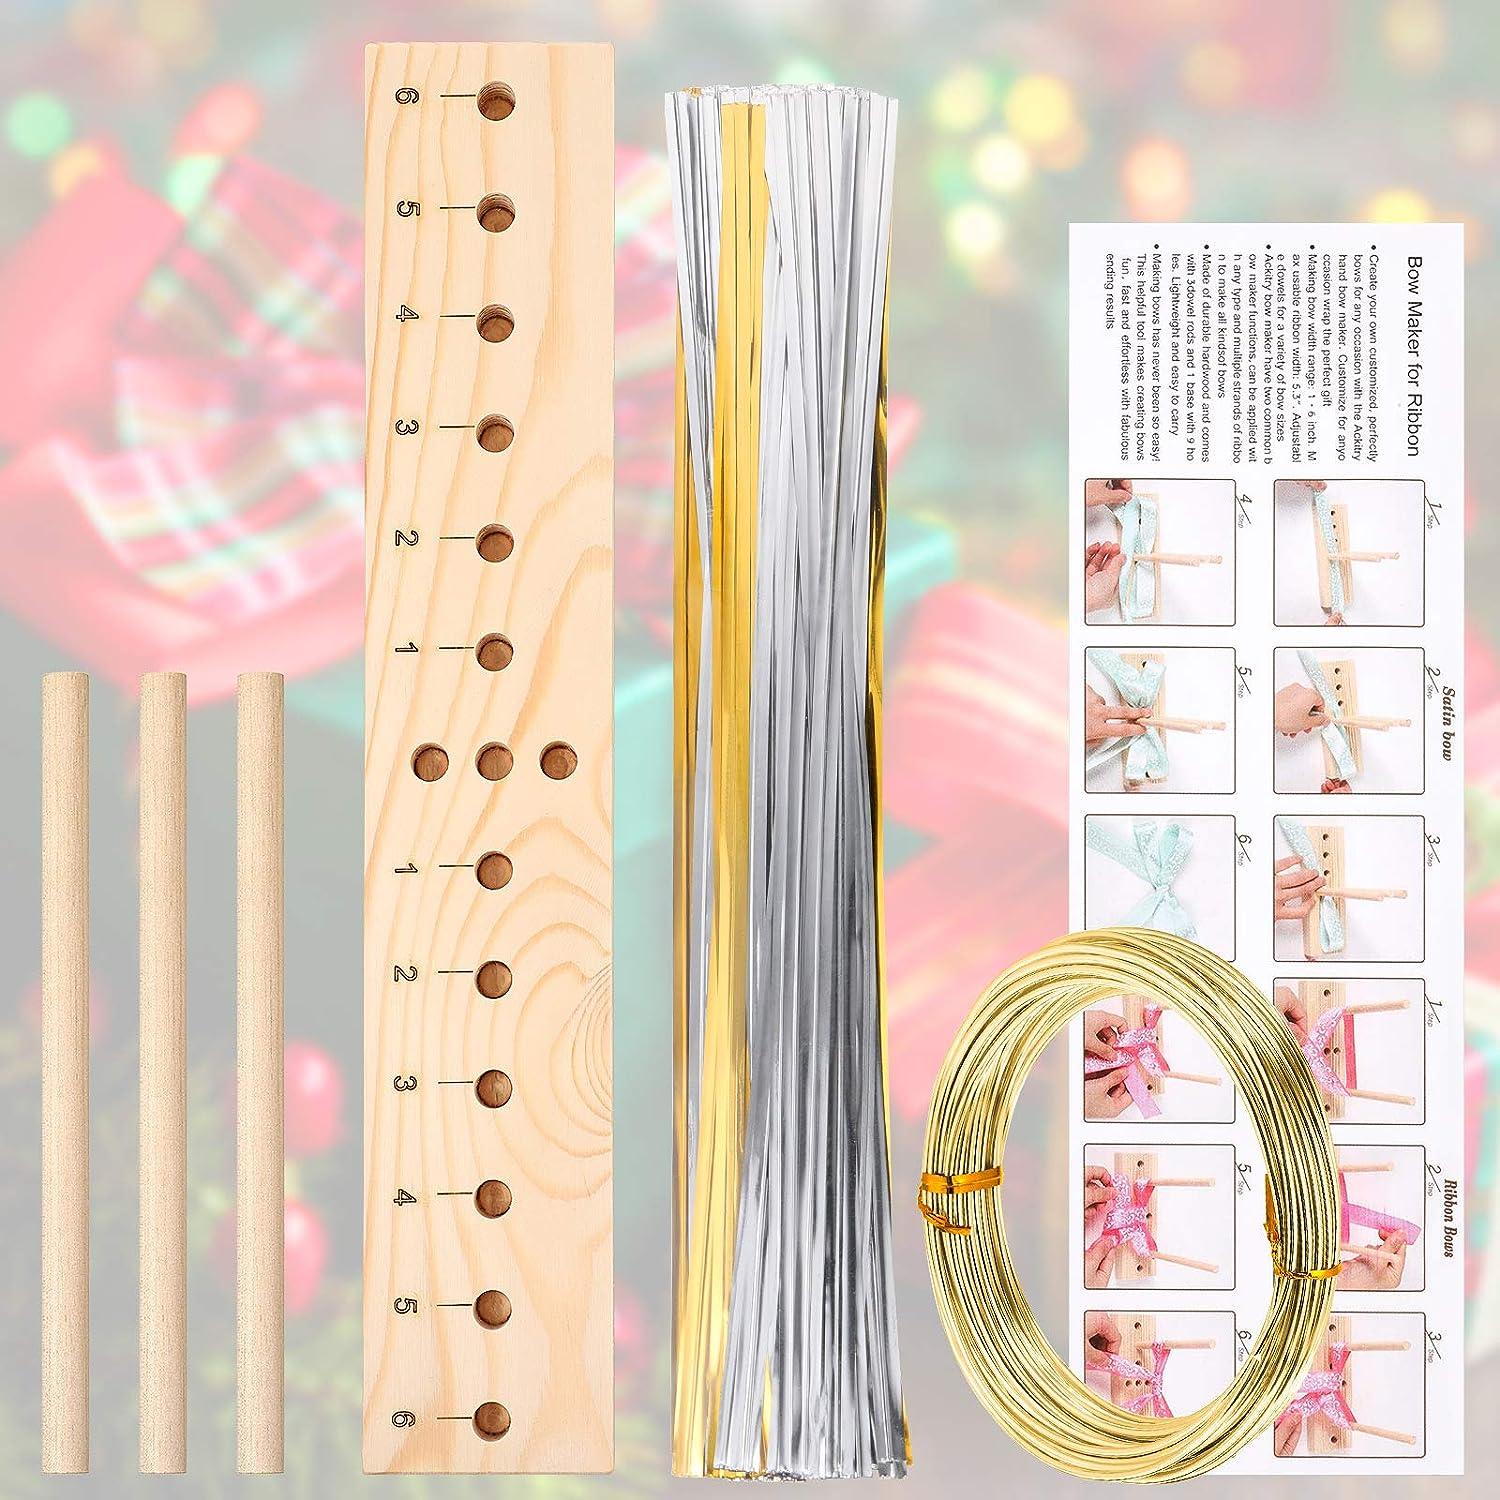 Bow Maker For Ribbon For Wreaths, Wooden Ribbon Bow Maker With Twist Ties  And Instructions For Creating Gift Bows, Hair Bows, Corsages, Holiday Wreath